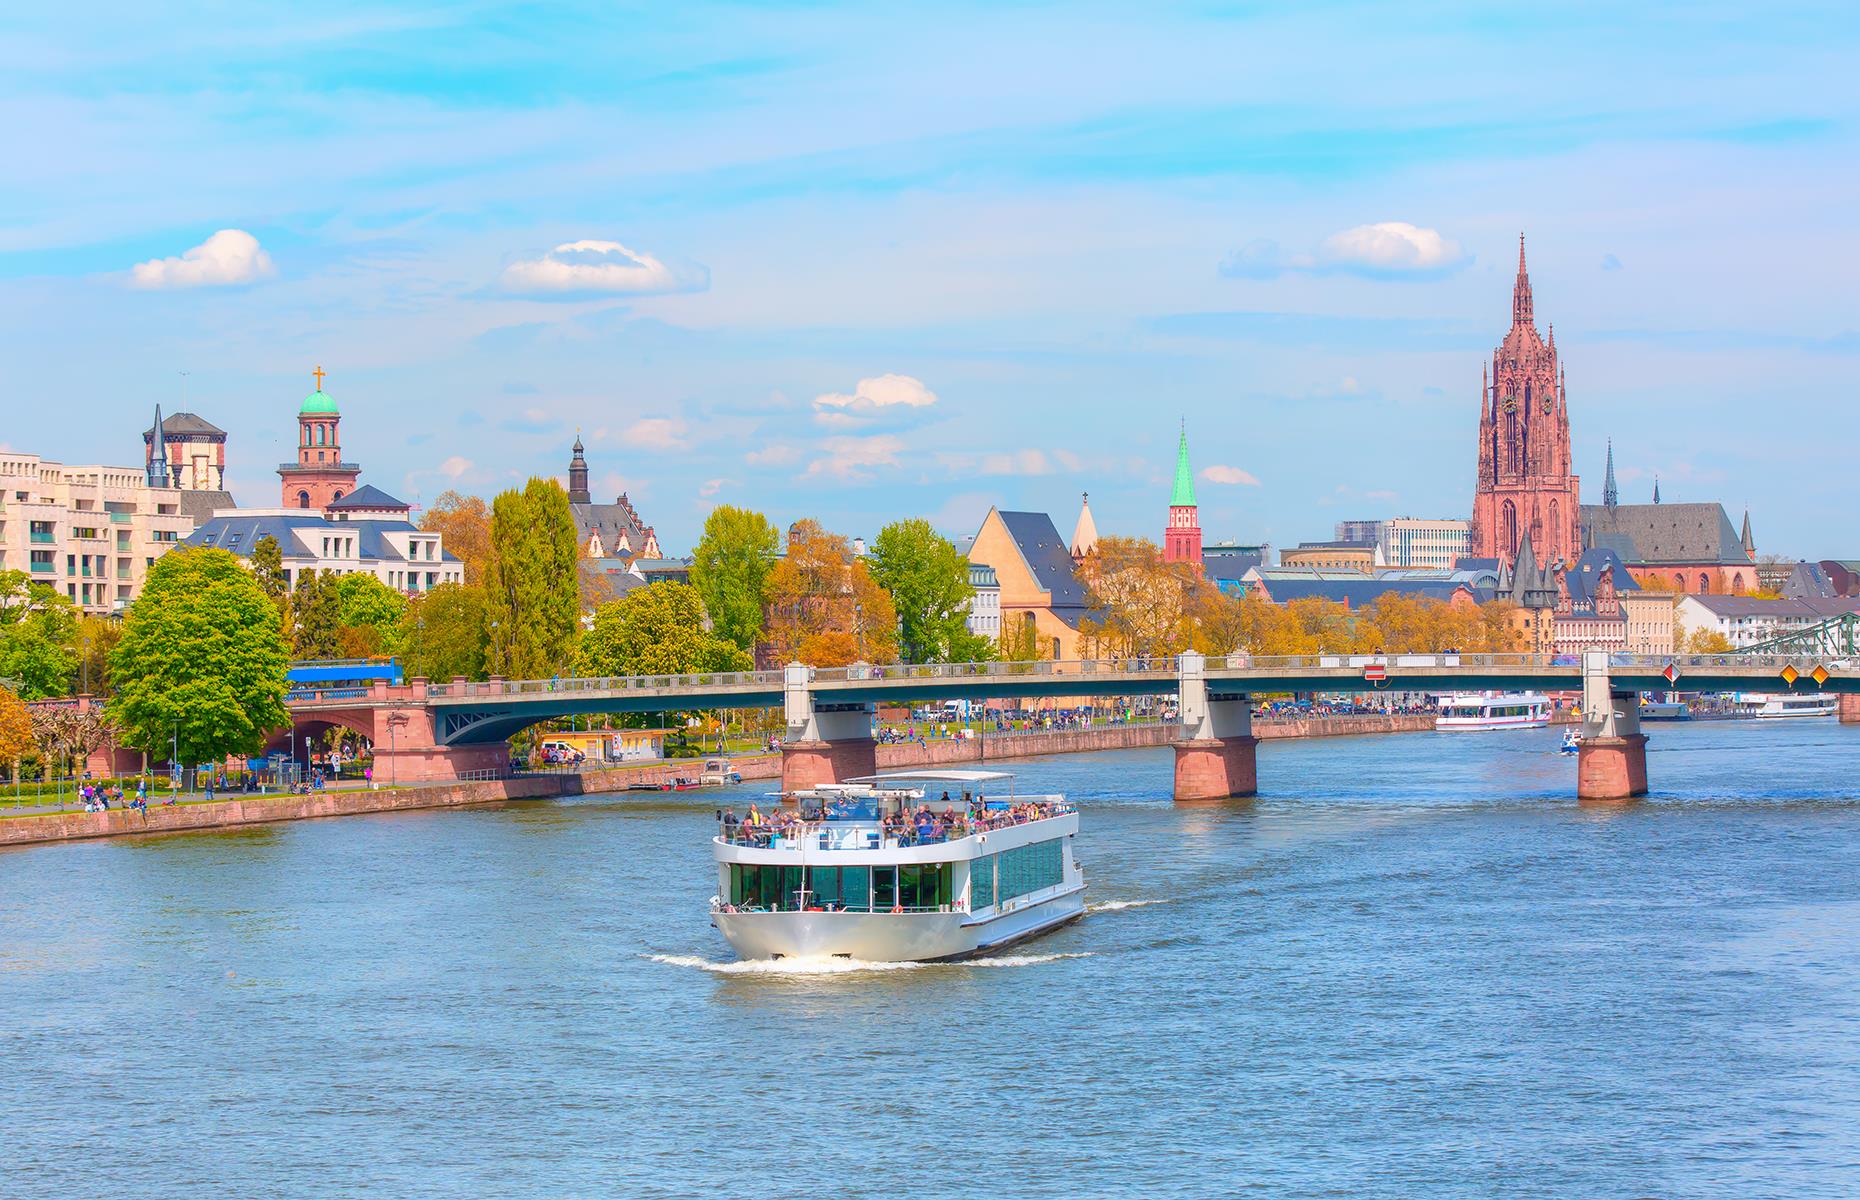 Keen to sail along Europe’s most famous rivers but not so keen on crowds? Choose a river cruise that goes well beyond the cities on the itinerary, and you’ll be richly rewarded. For example, opt for one of the cruises that travels past Budapest to the Black Sea’s spectacular marshy delta, or along the more remote stretches of Germany’s often-overlooked Main River.